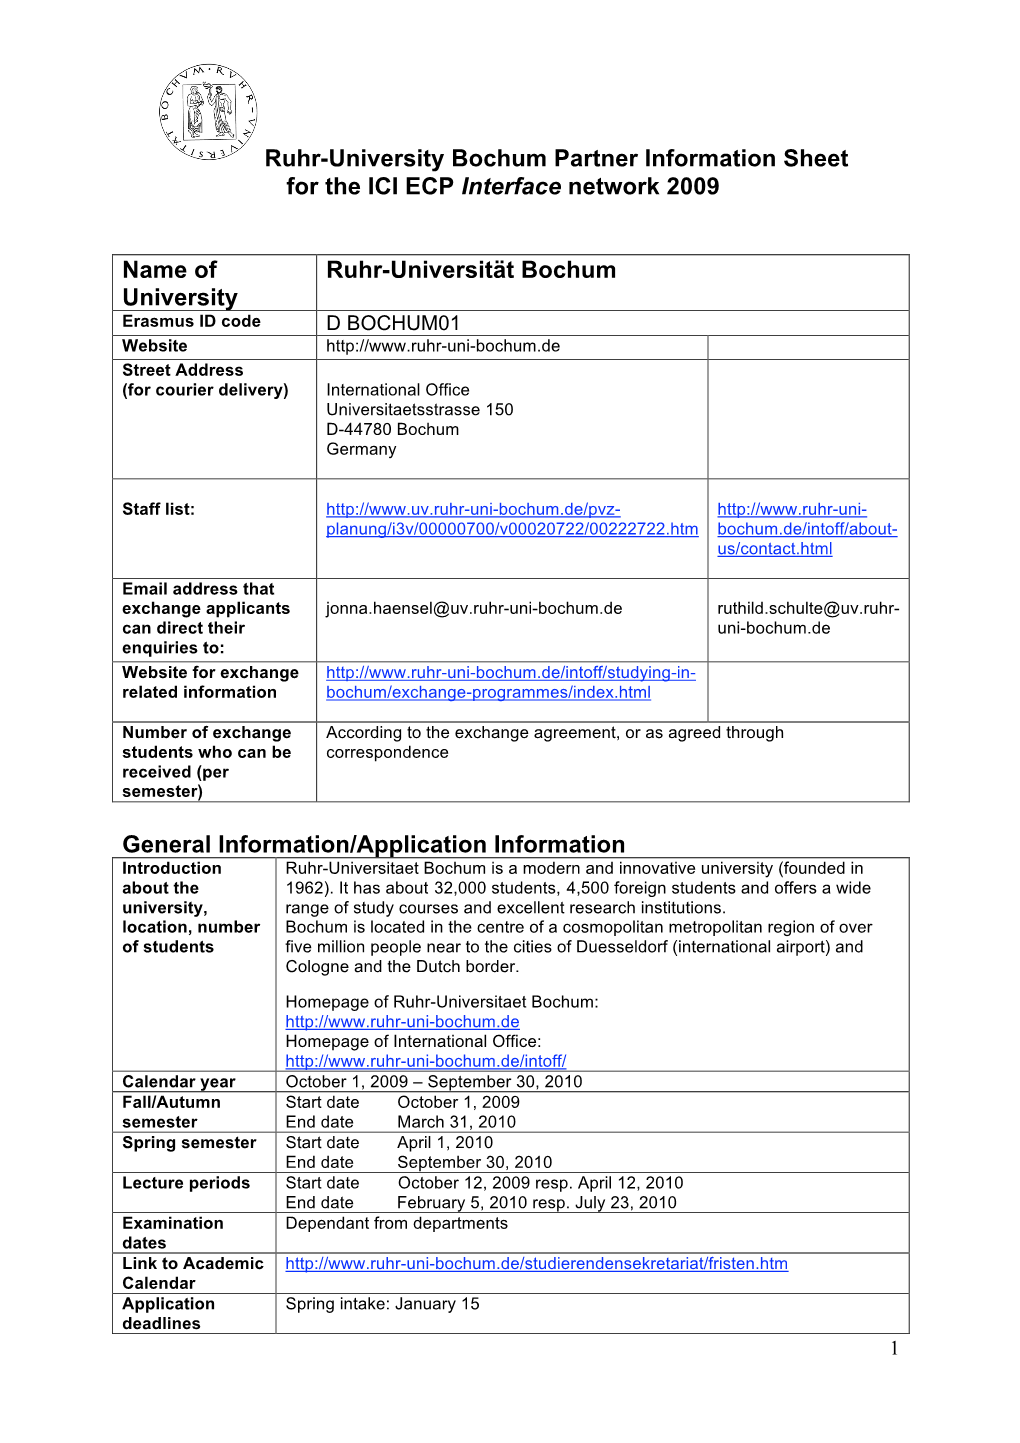 Ruhr-University Bochum Partner Information Sheet for the ICI ECP Interface Network 2009